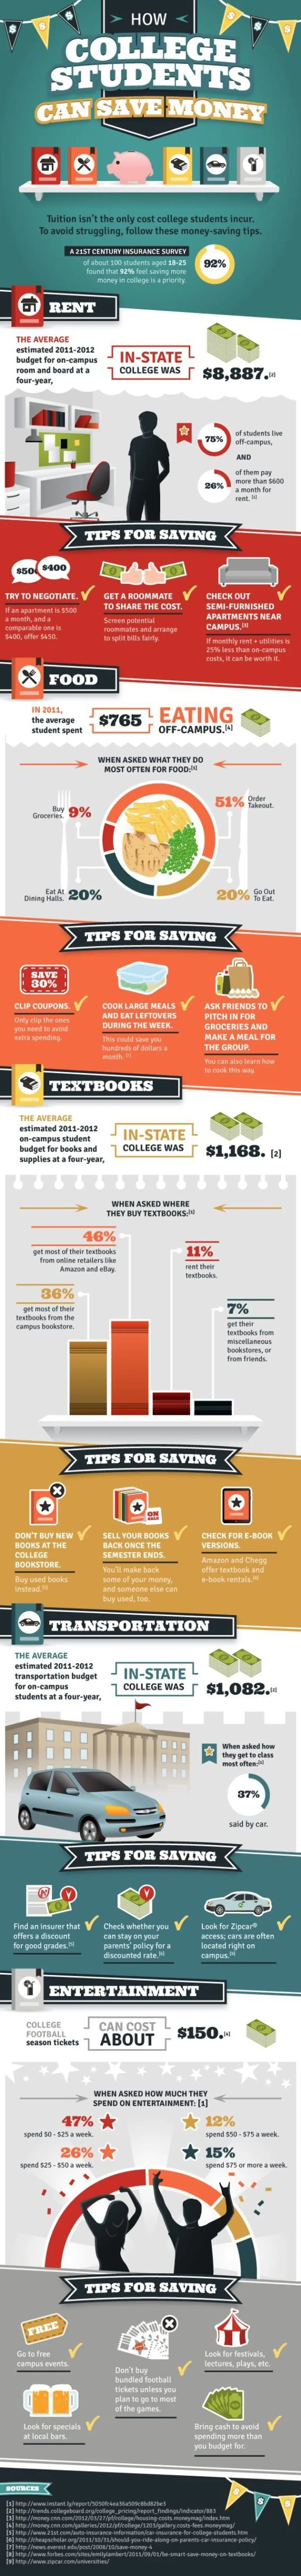 How College Students Can save Money